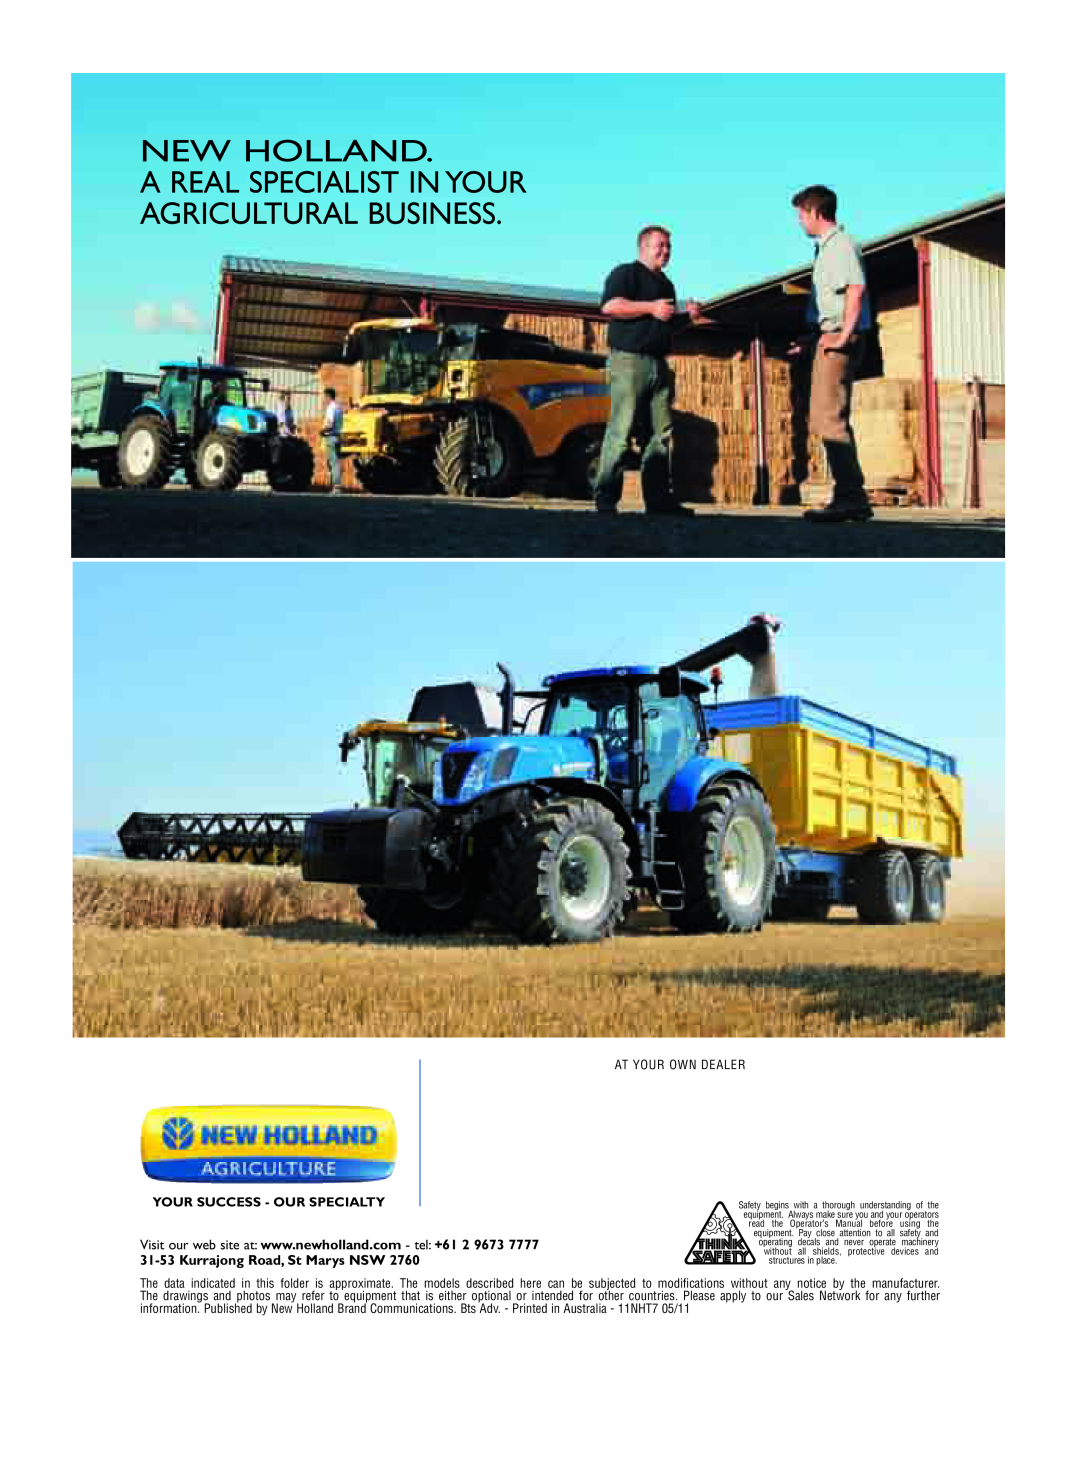 New Holland T7.260, T7.270 New Holland, A Real Specialist In Your Agricultural Business, Your Success - Our Specialty 